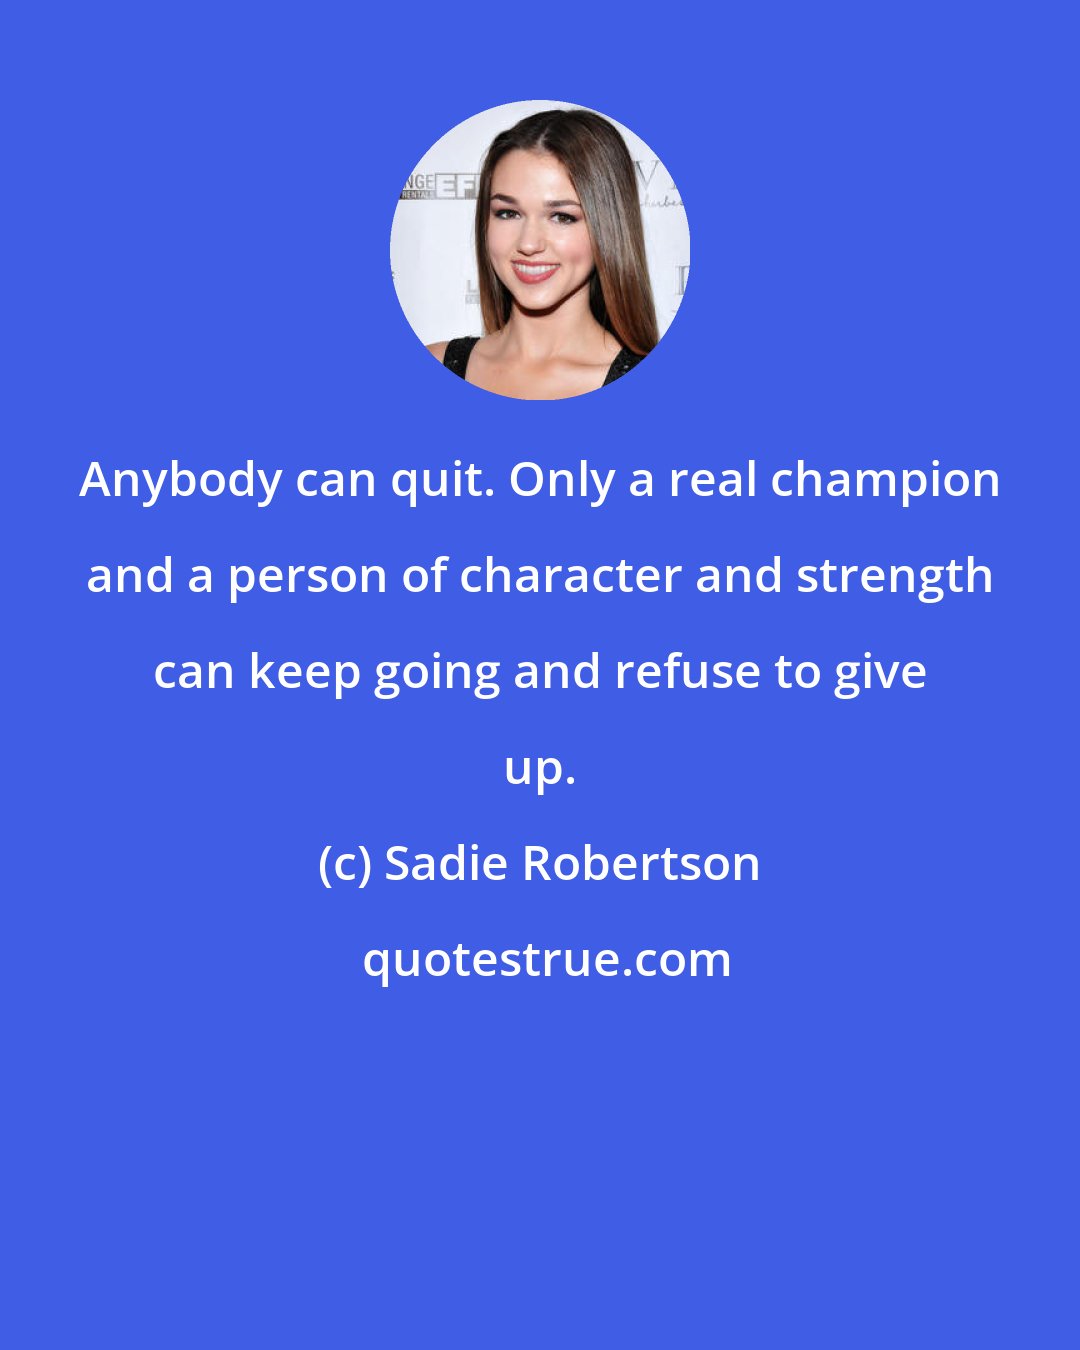 Sadie Robertson: Anybody can quit. Only a real champion and a person of character and strength can keep going and refuse to give up.